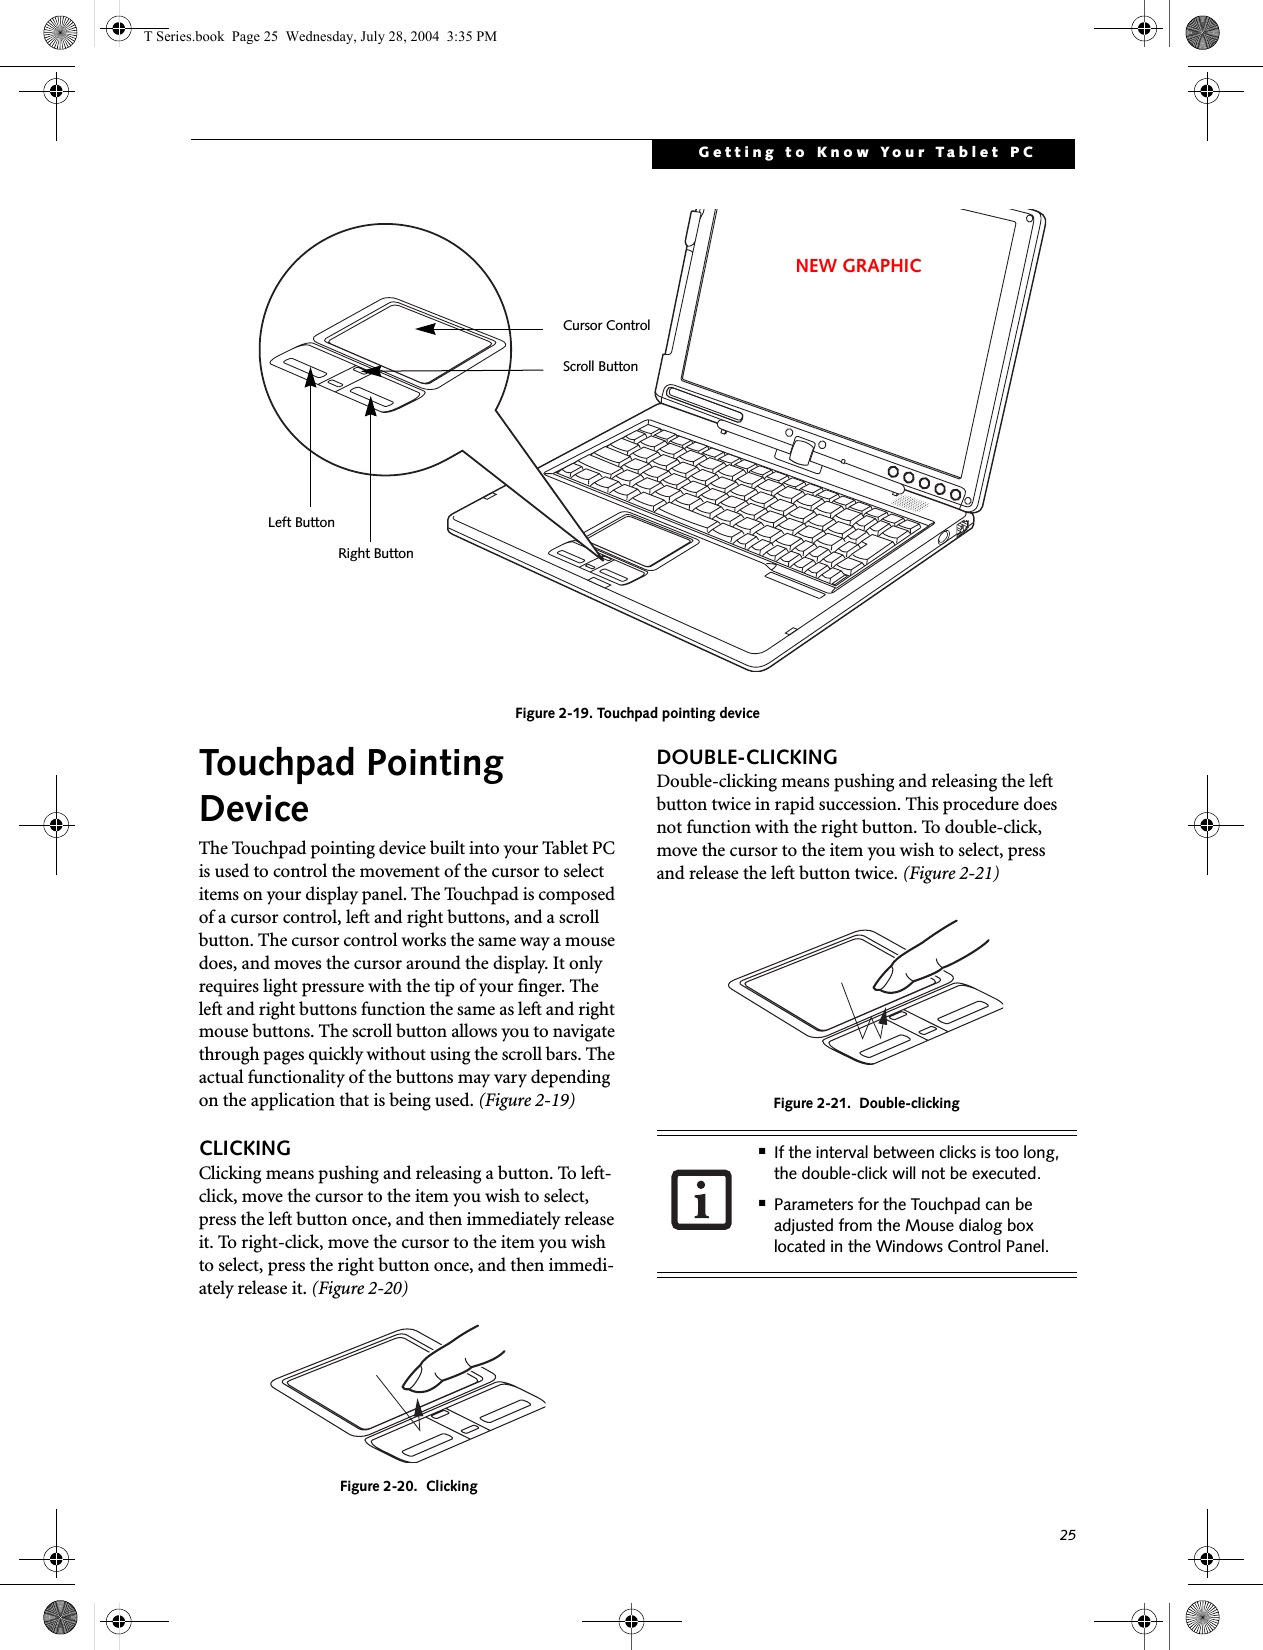 25Getting to Know Your Tablet PCFigure 2-19. Touchpad pointing deviceTouchpad Pointing DeviceThe Touchpad pointing device built into your Tablet PC is used to control the movement of the cursor to select items on your display panel. The Touchpad is composed of a cursor control, left and right buttons, and a scroll button. The cursor control works the same way a mouse does, and moves the cursor around the display. It only requires light pressure with the tip of your finger. The left and right buttons function the same as left and right mouse buttons. The scroll button allows you to navigate through pages quickly without using the scroll bars. The actual functionality of the buttons may vary depending on the application that is being used. (Figure 2-19)CLICKINGClicking means pushing and releasing a button. To left-click, move the cursor to the item you wish to select, press the left button once, and then immediately release it. To right-click, move the cursor to the item you wish to select, press the right button once, and then immedi-ately release it. (Figure 2-20)Figure 2-20.  ClickingDOUBLE-CLICKINGDouble-clicking means pushing and releasing the left button twice in rapid succession. This procedure does not function with the right button. To double-click, move the cursor to the item you wish to select, pressand release the left button twice. (Figure 2-21)Figure 2-21.  Double-clickingLeft ButtonRight ButtonScroll ButtonCursor ControlNEW GRAPHIC■If the interval between clicks is too long, the double-click will not be executed.■Parameters for the Touchpad can be adjusted from the Mouse dialog box located in the Windows Control Panel.T Series.book  Page 25  Wednesday, July 28, 2004  3:35 PM